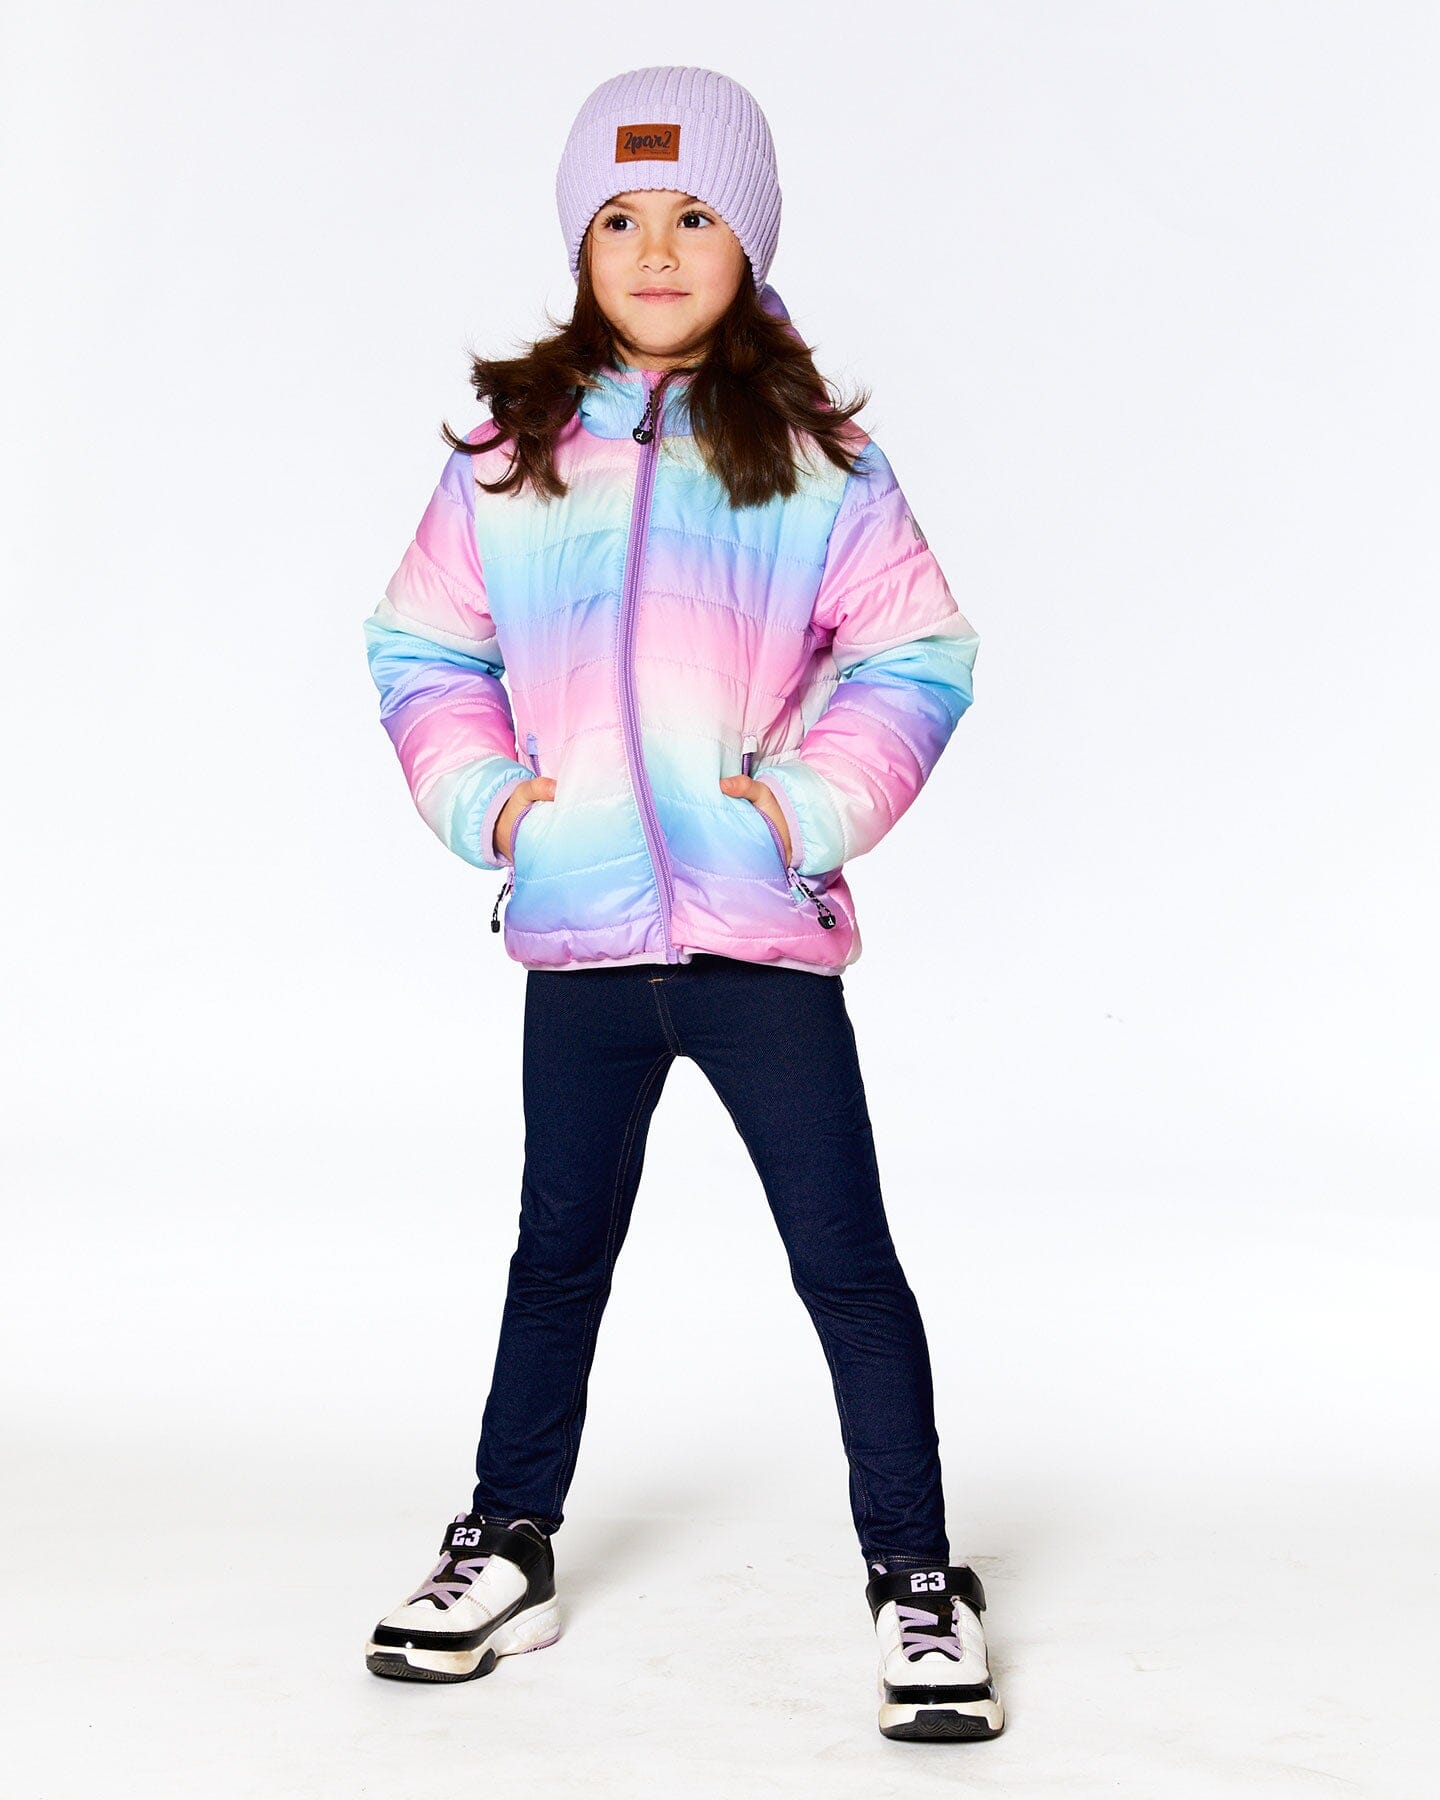 Quilted Transition Jacket Multicolor Gradient - F20W64_026